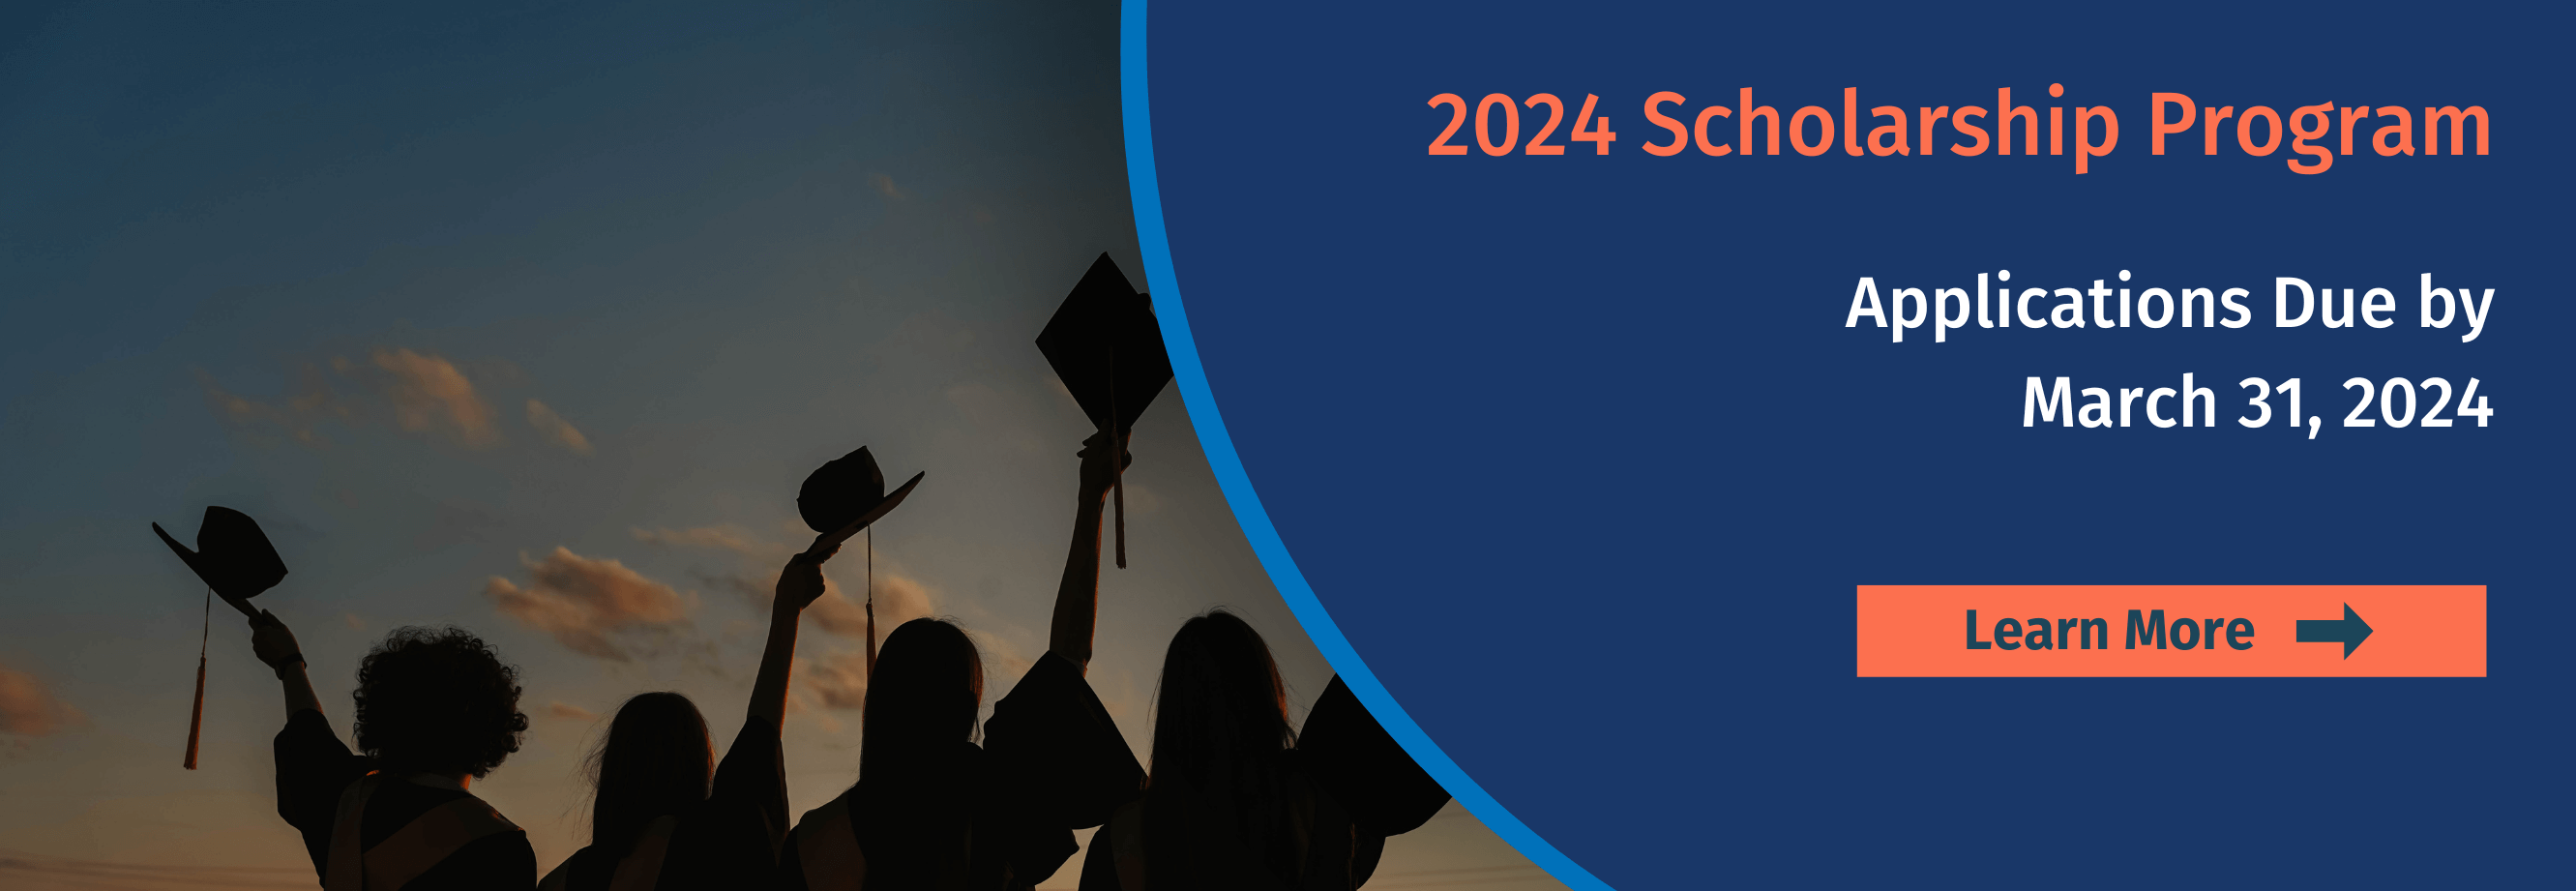 Image with text describing the 2024 scholarship program with applications due by March 31, 2024 and photo of graduates